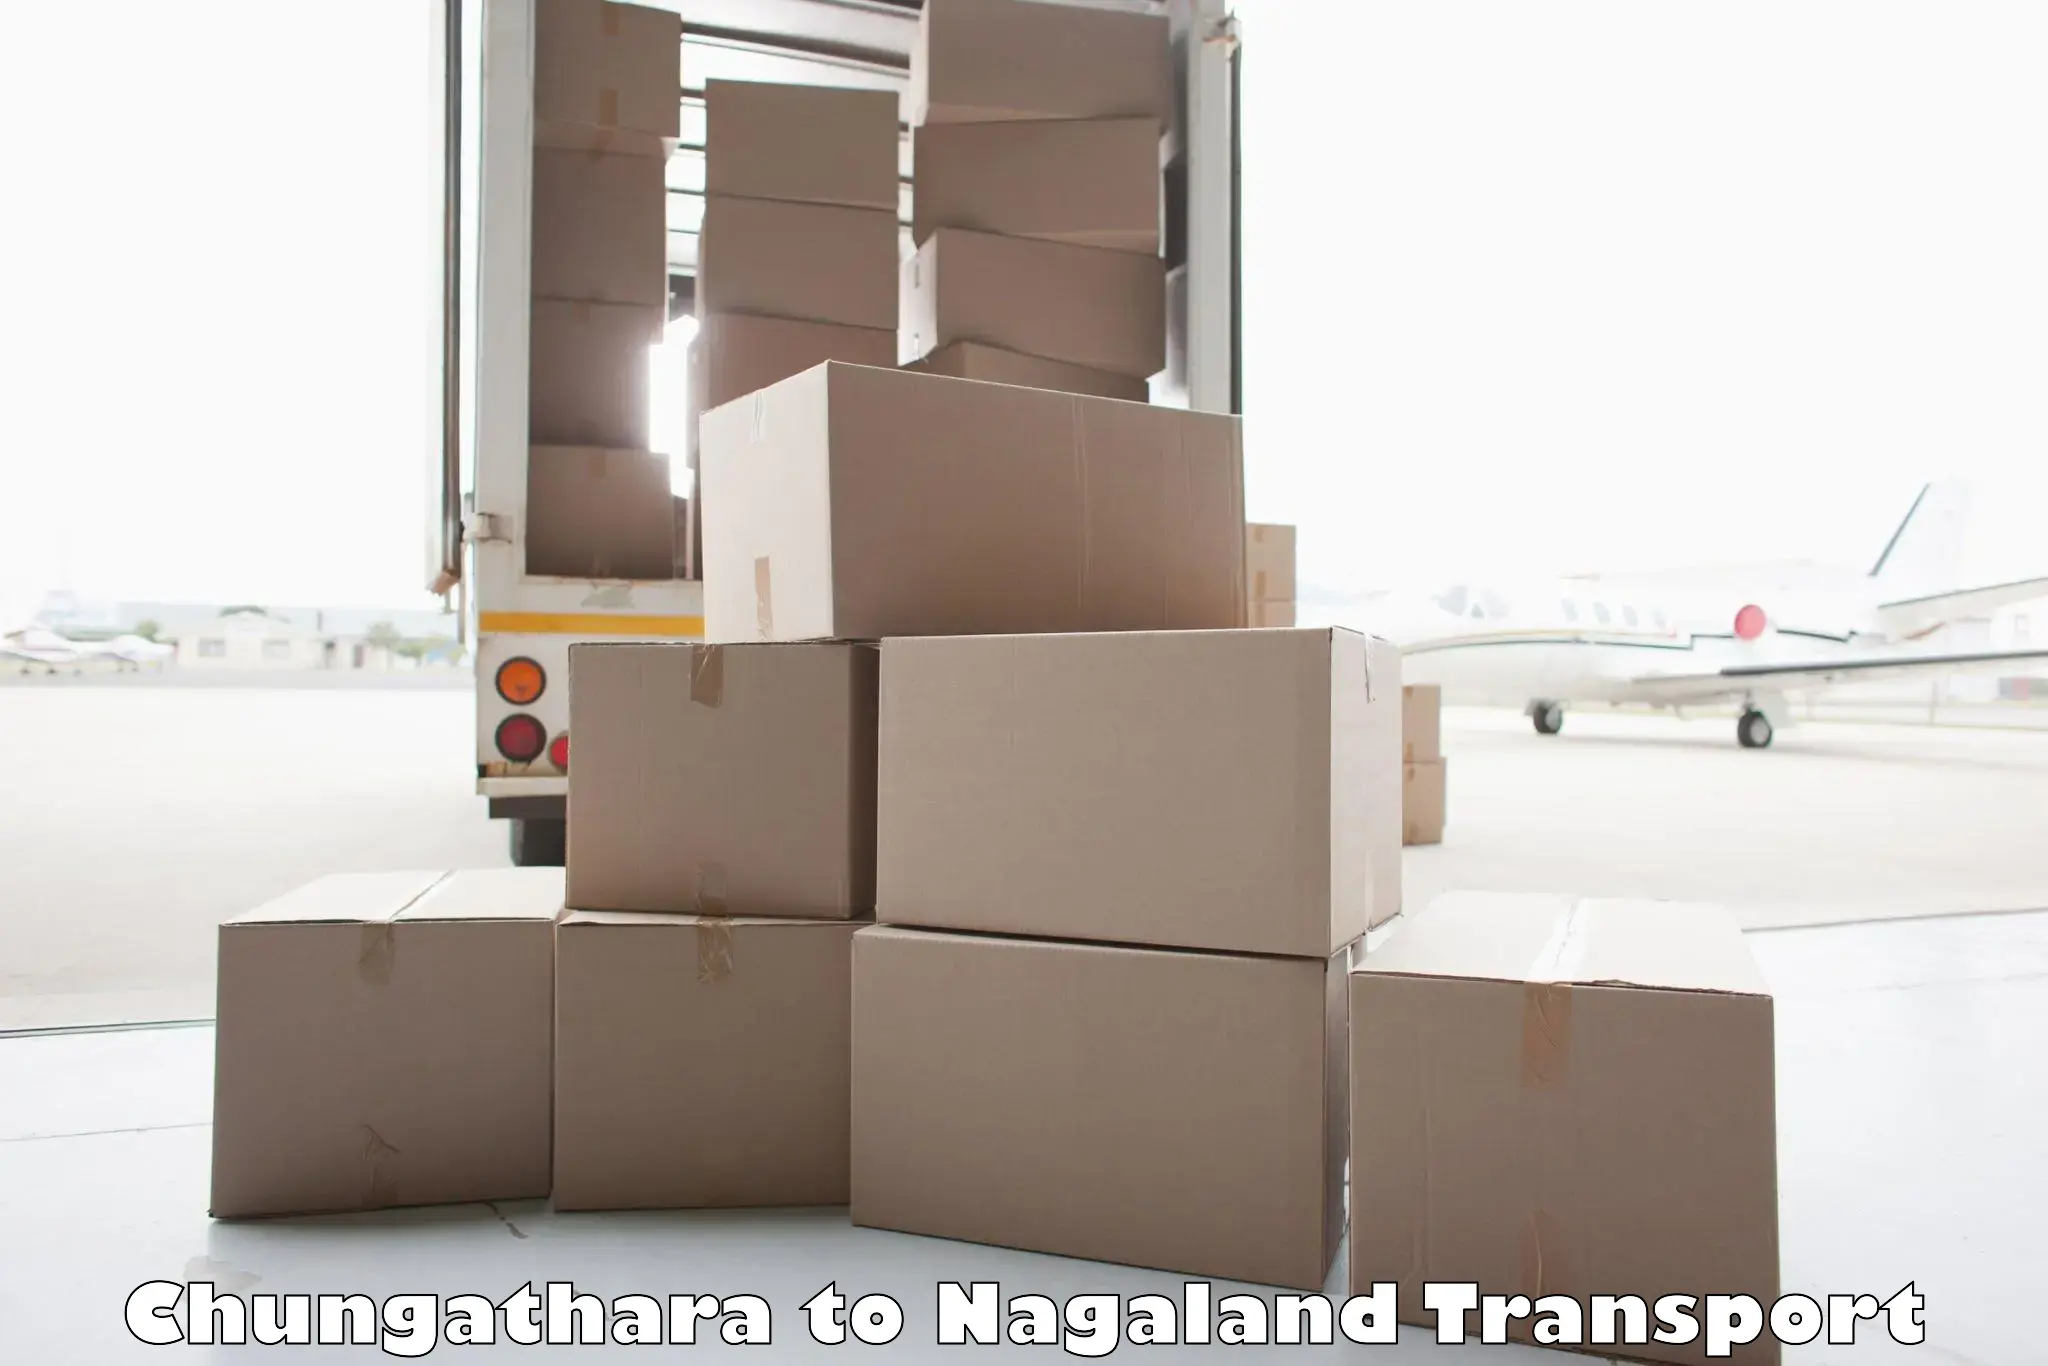 Transport bike from one state to another Chungathara to Nagaland